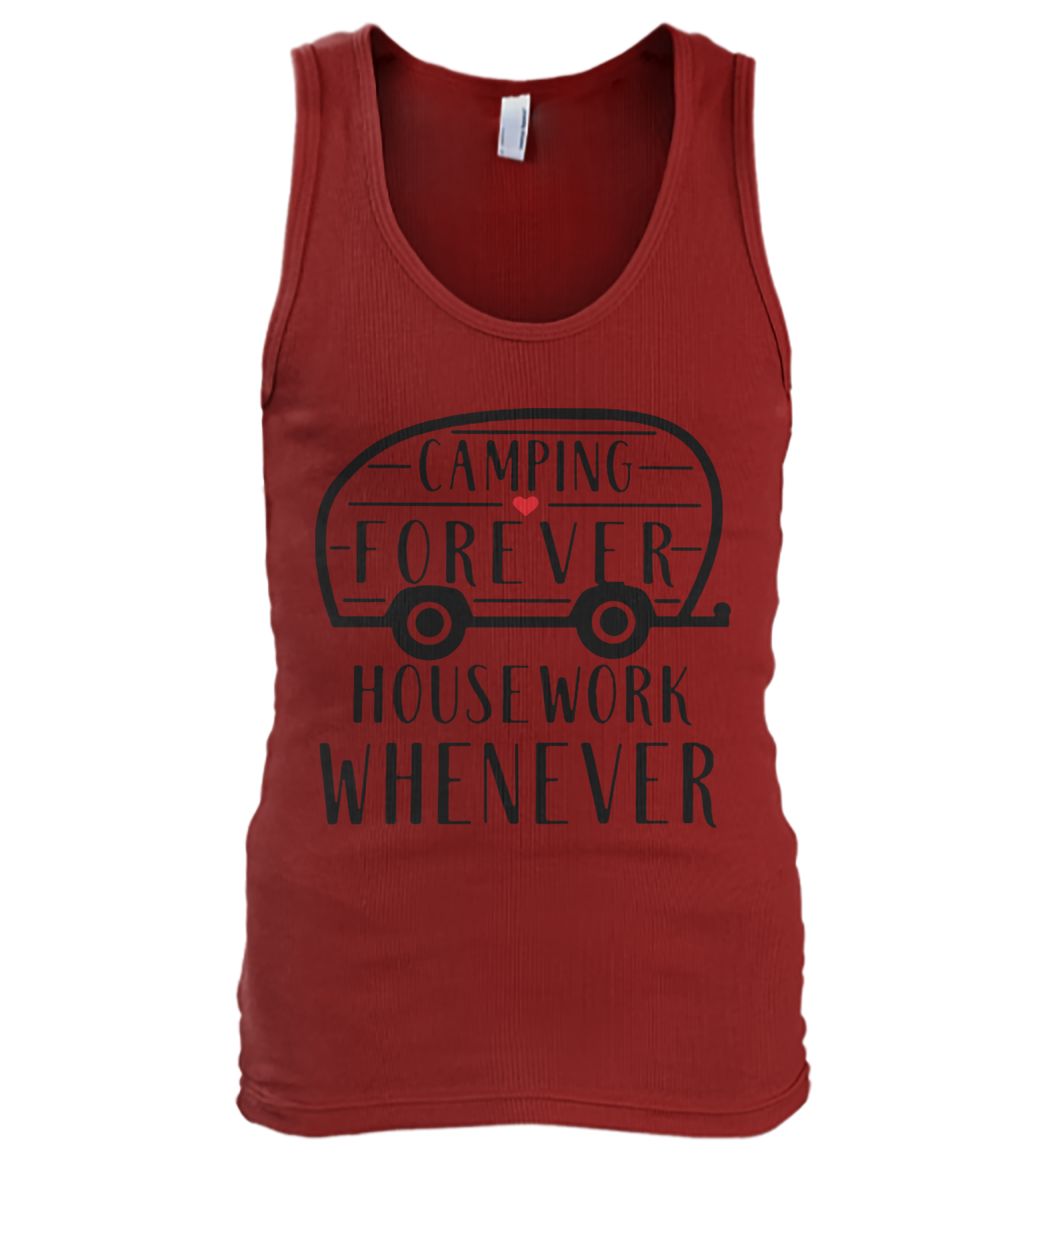 Camping forever housework whenever men's tank top